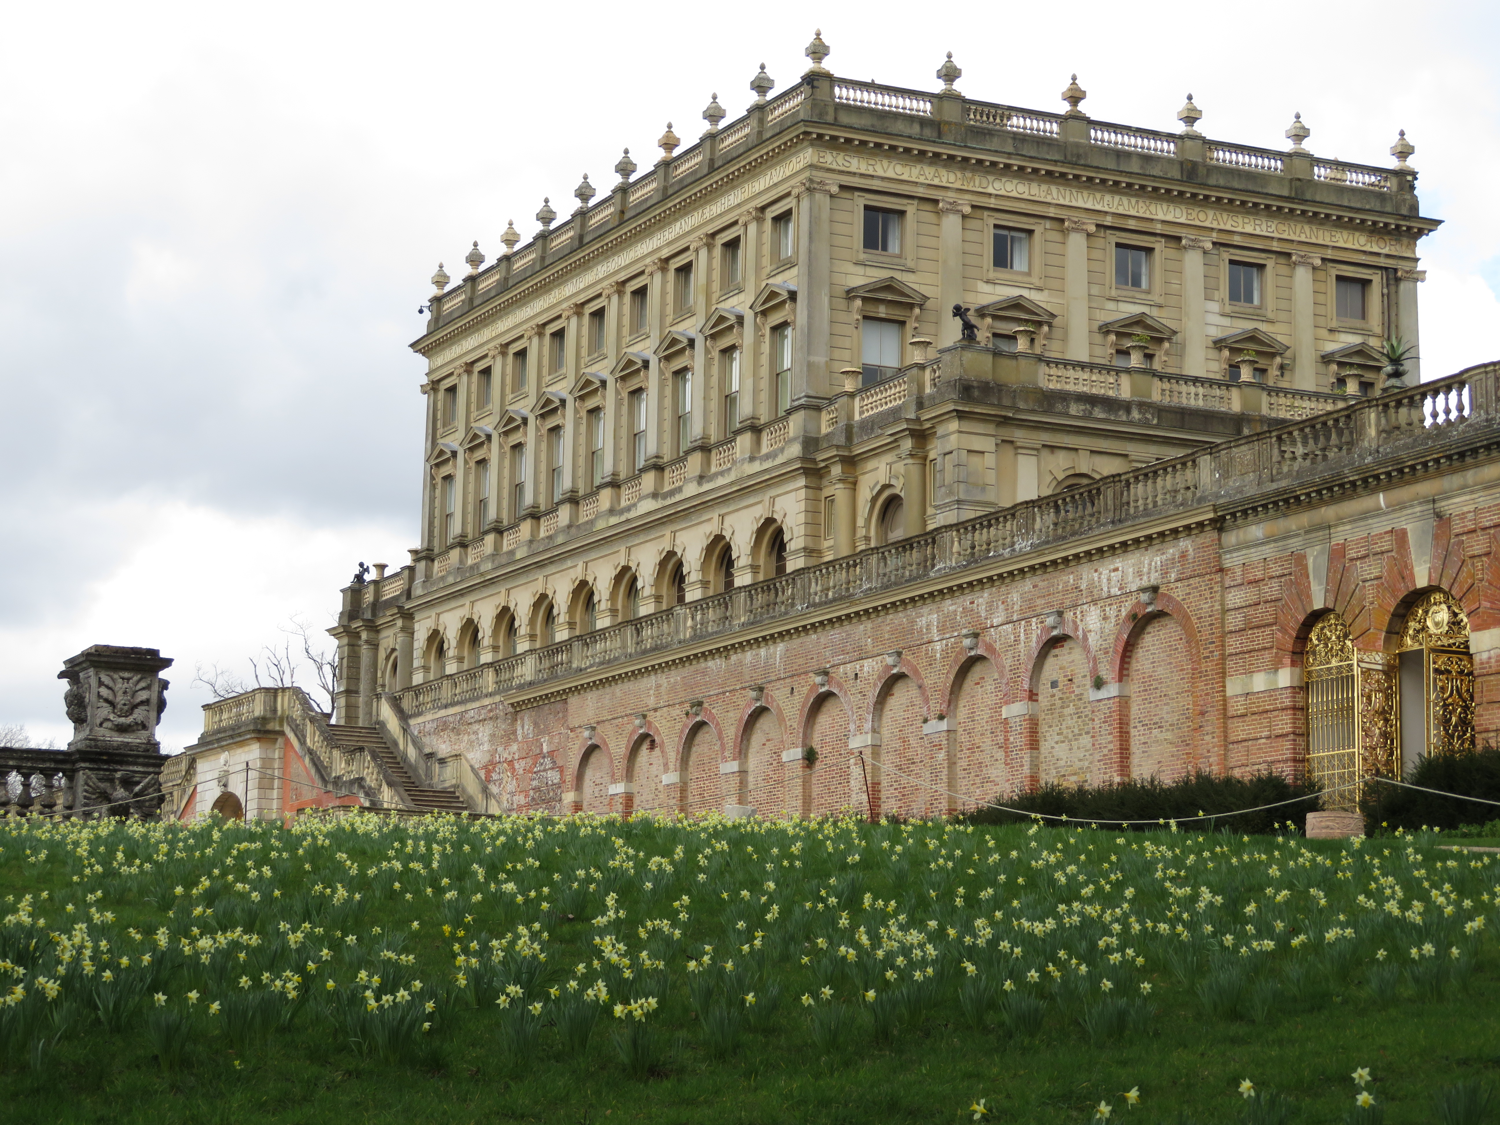 Rear view of Cliveden